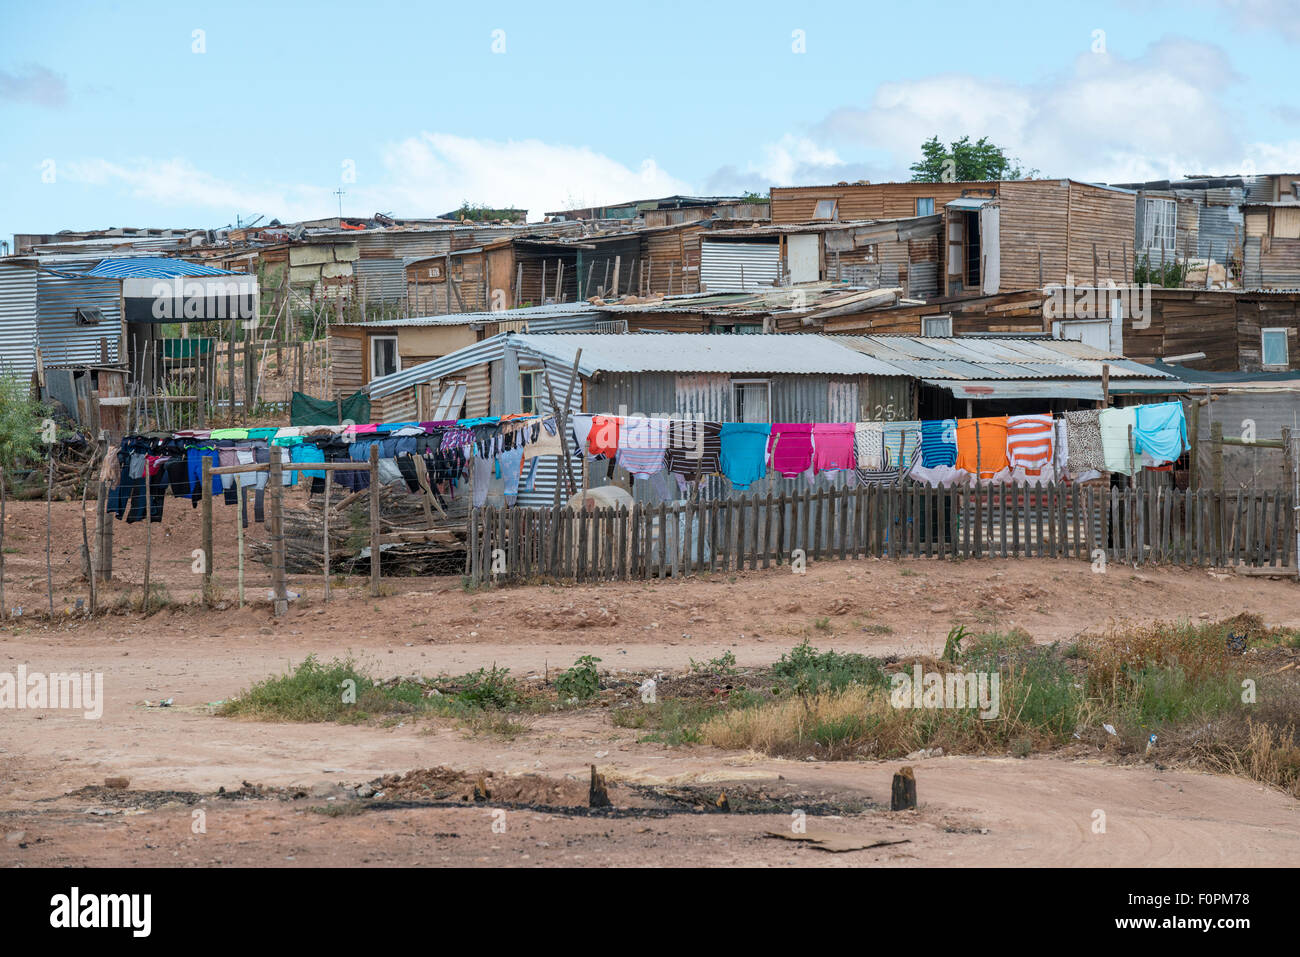 Shed with clothes line, township in Oudtshorn, Western Cape, South Africa Stock Photo